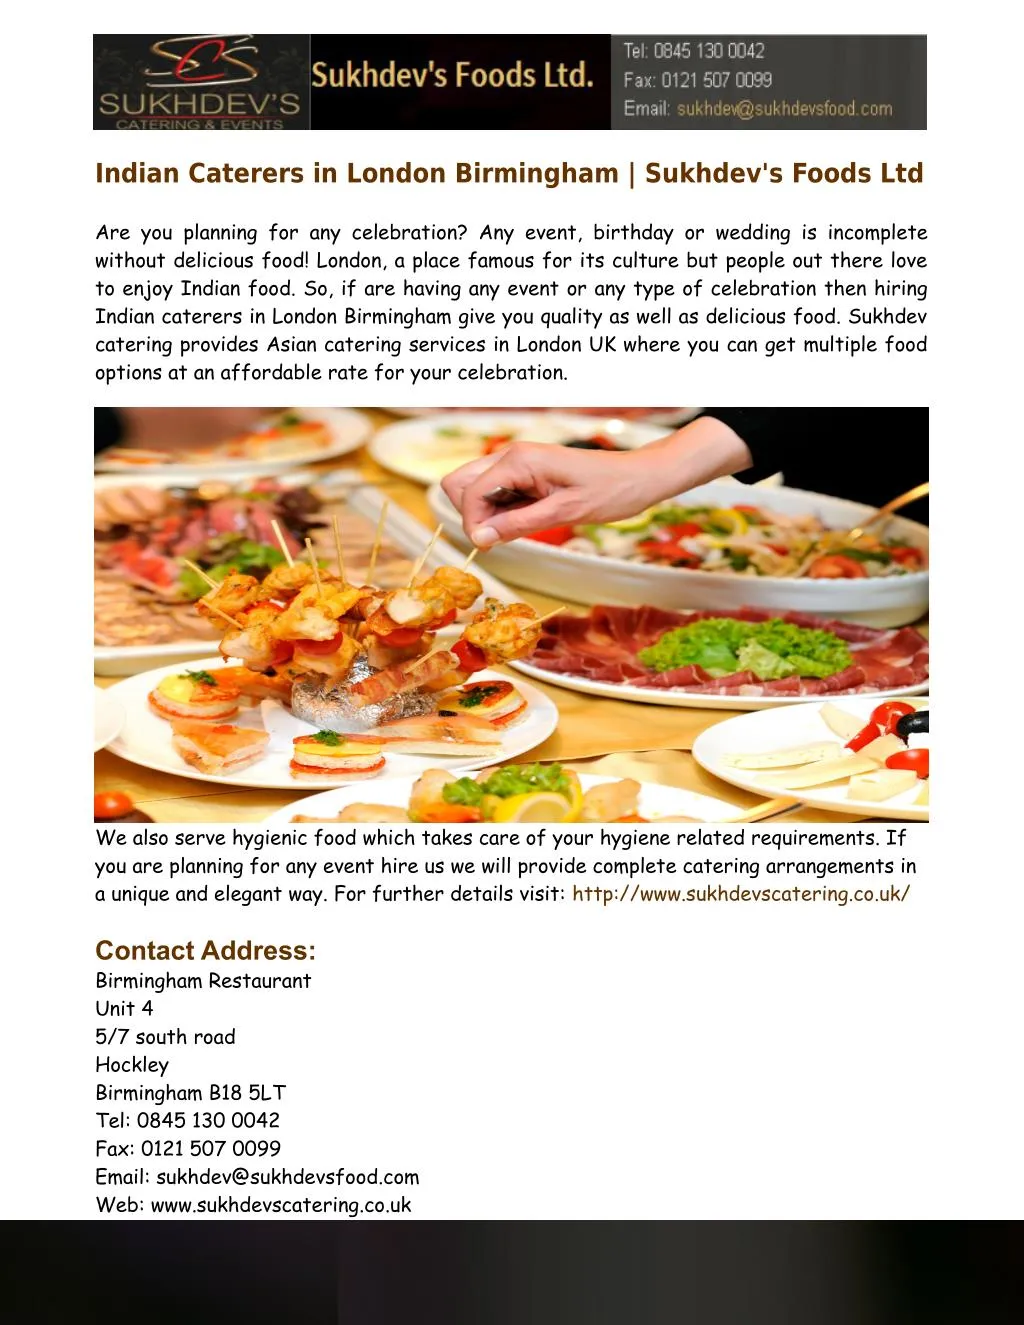 indian caterers in london birmingham sukhdev